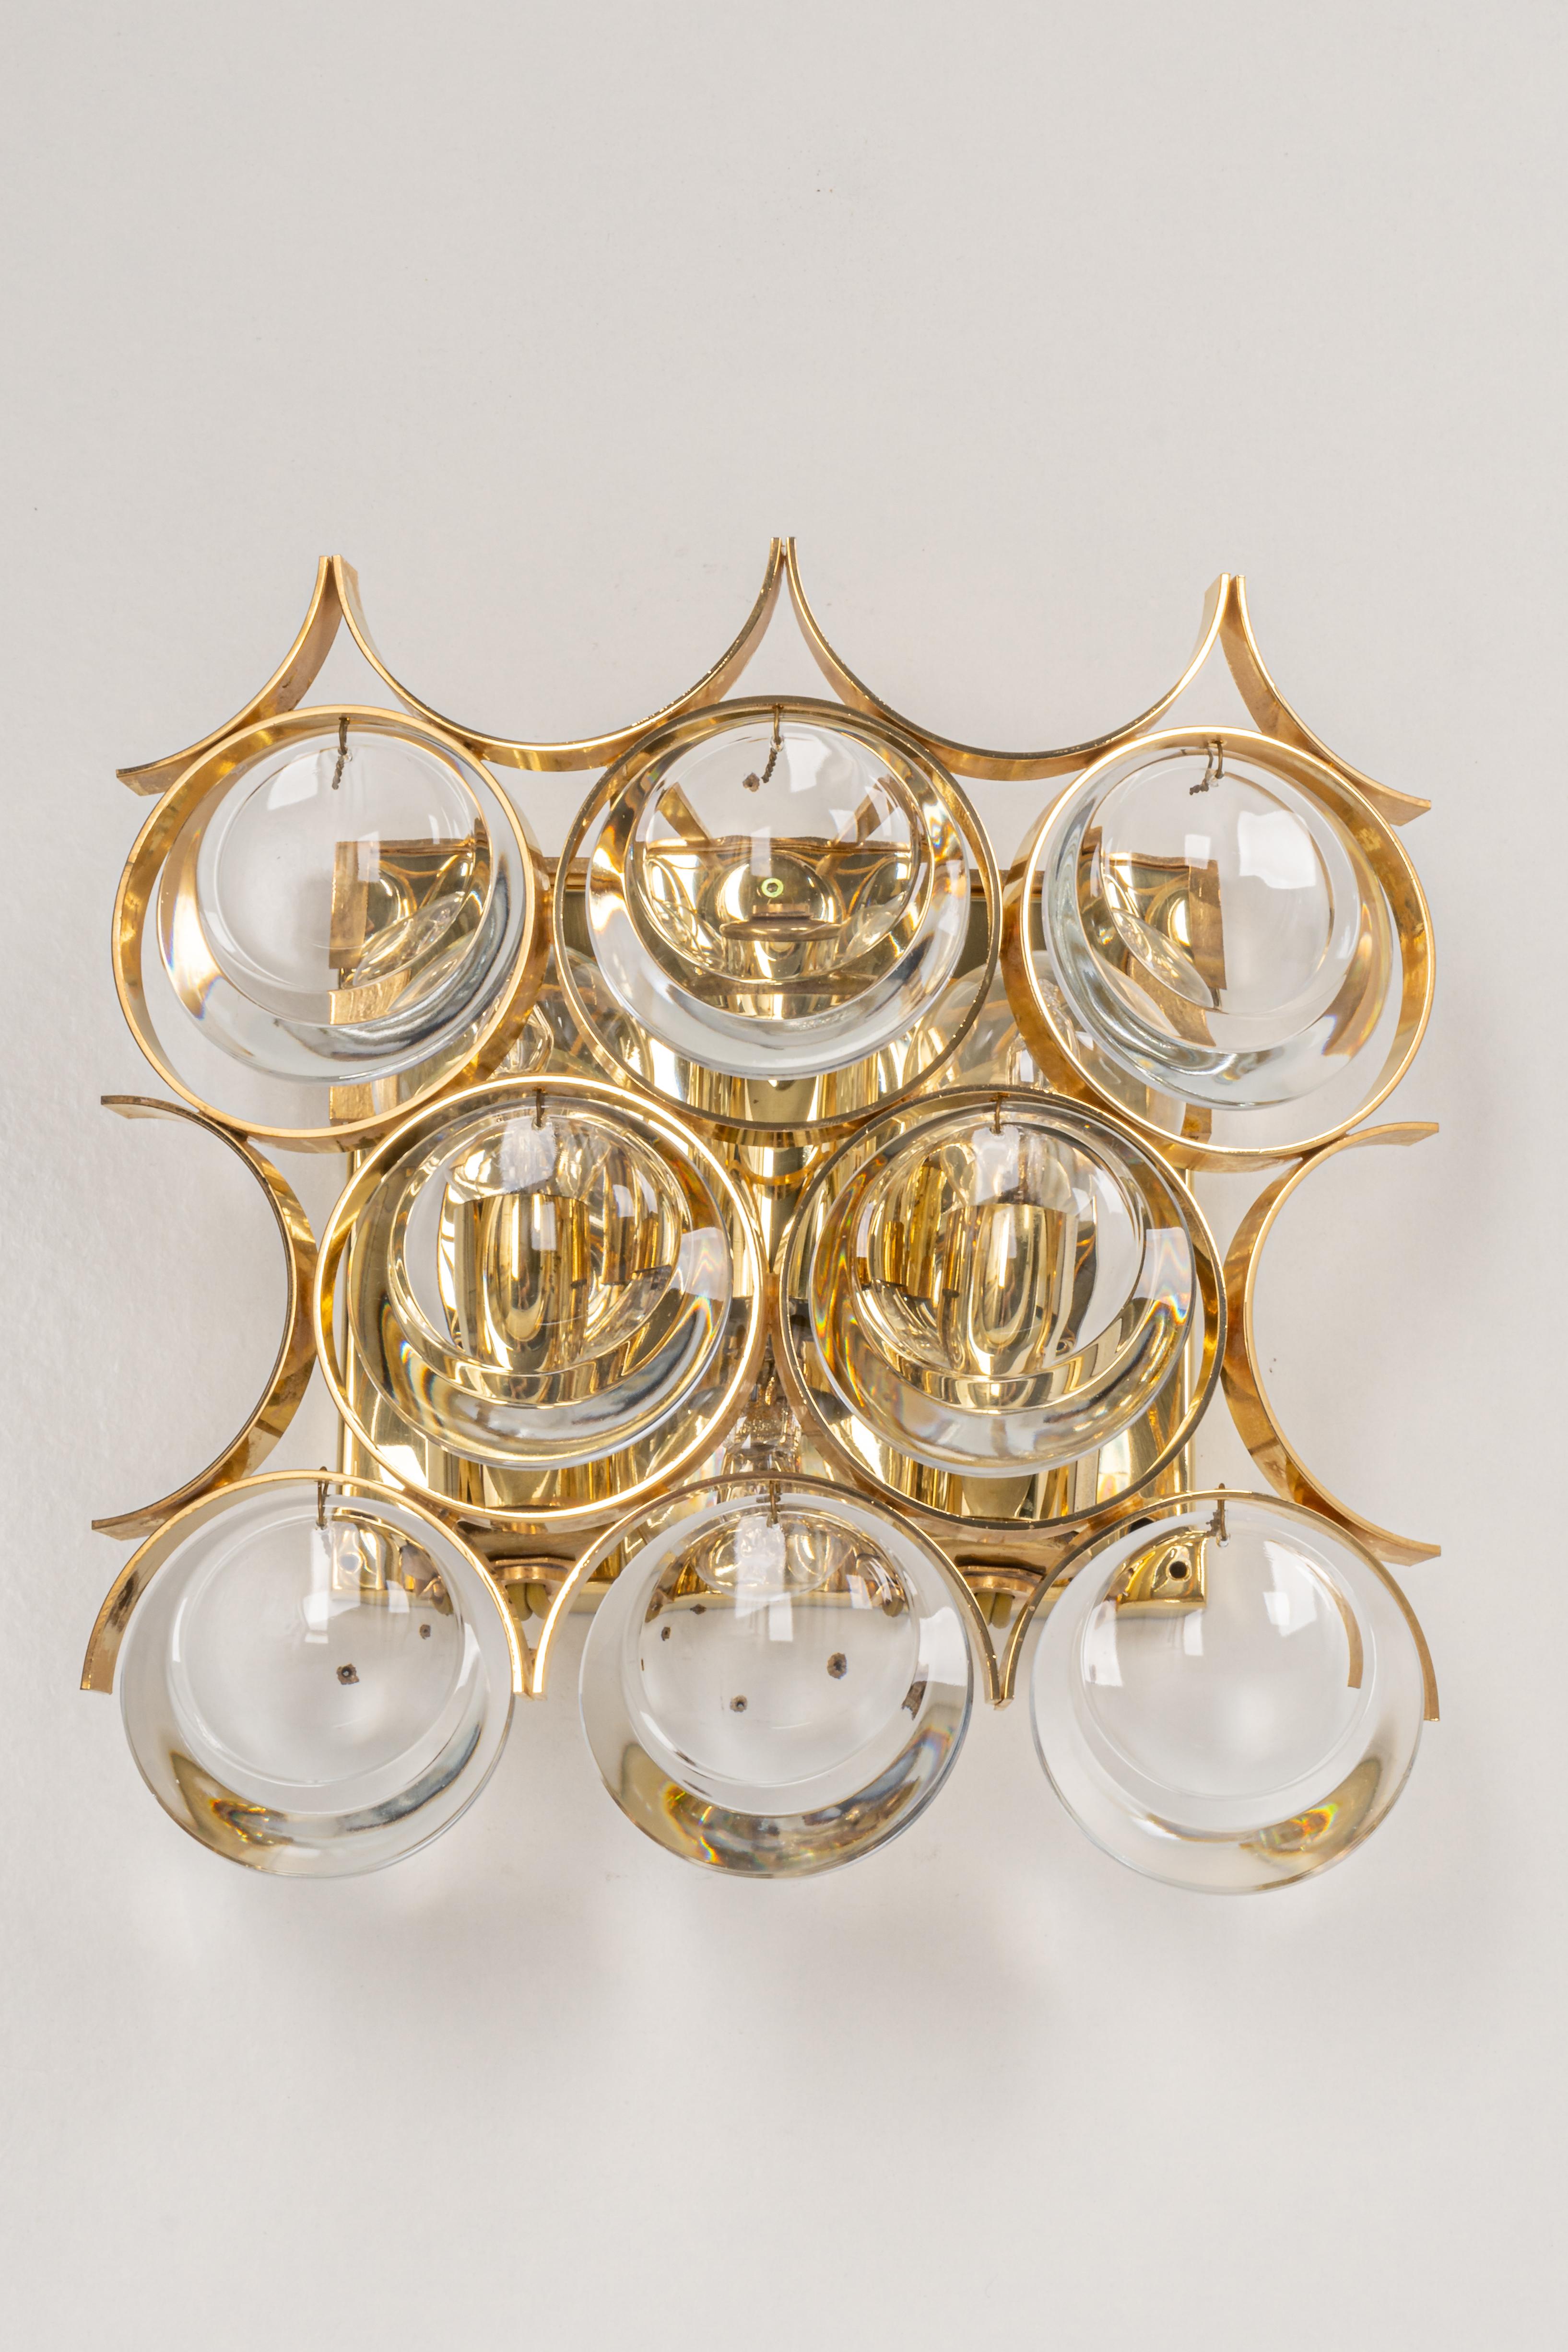 1 of 3 Pairs of Crystal Wall Lights, Sciolari Design, Palwa, Germany, 1960s For Sale 3